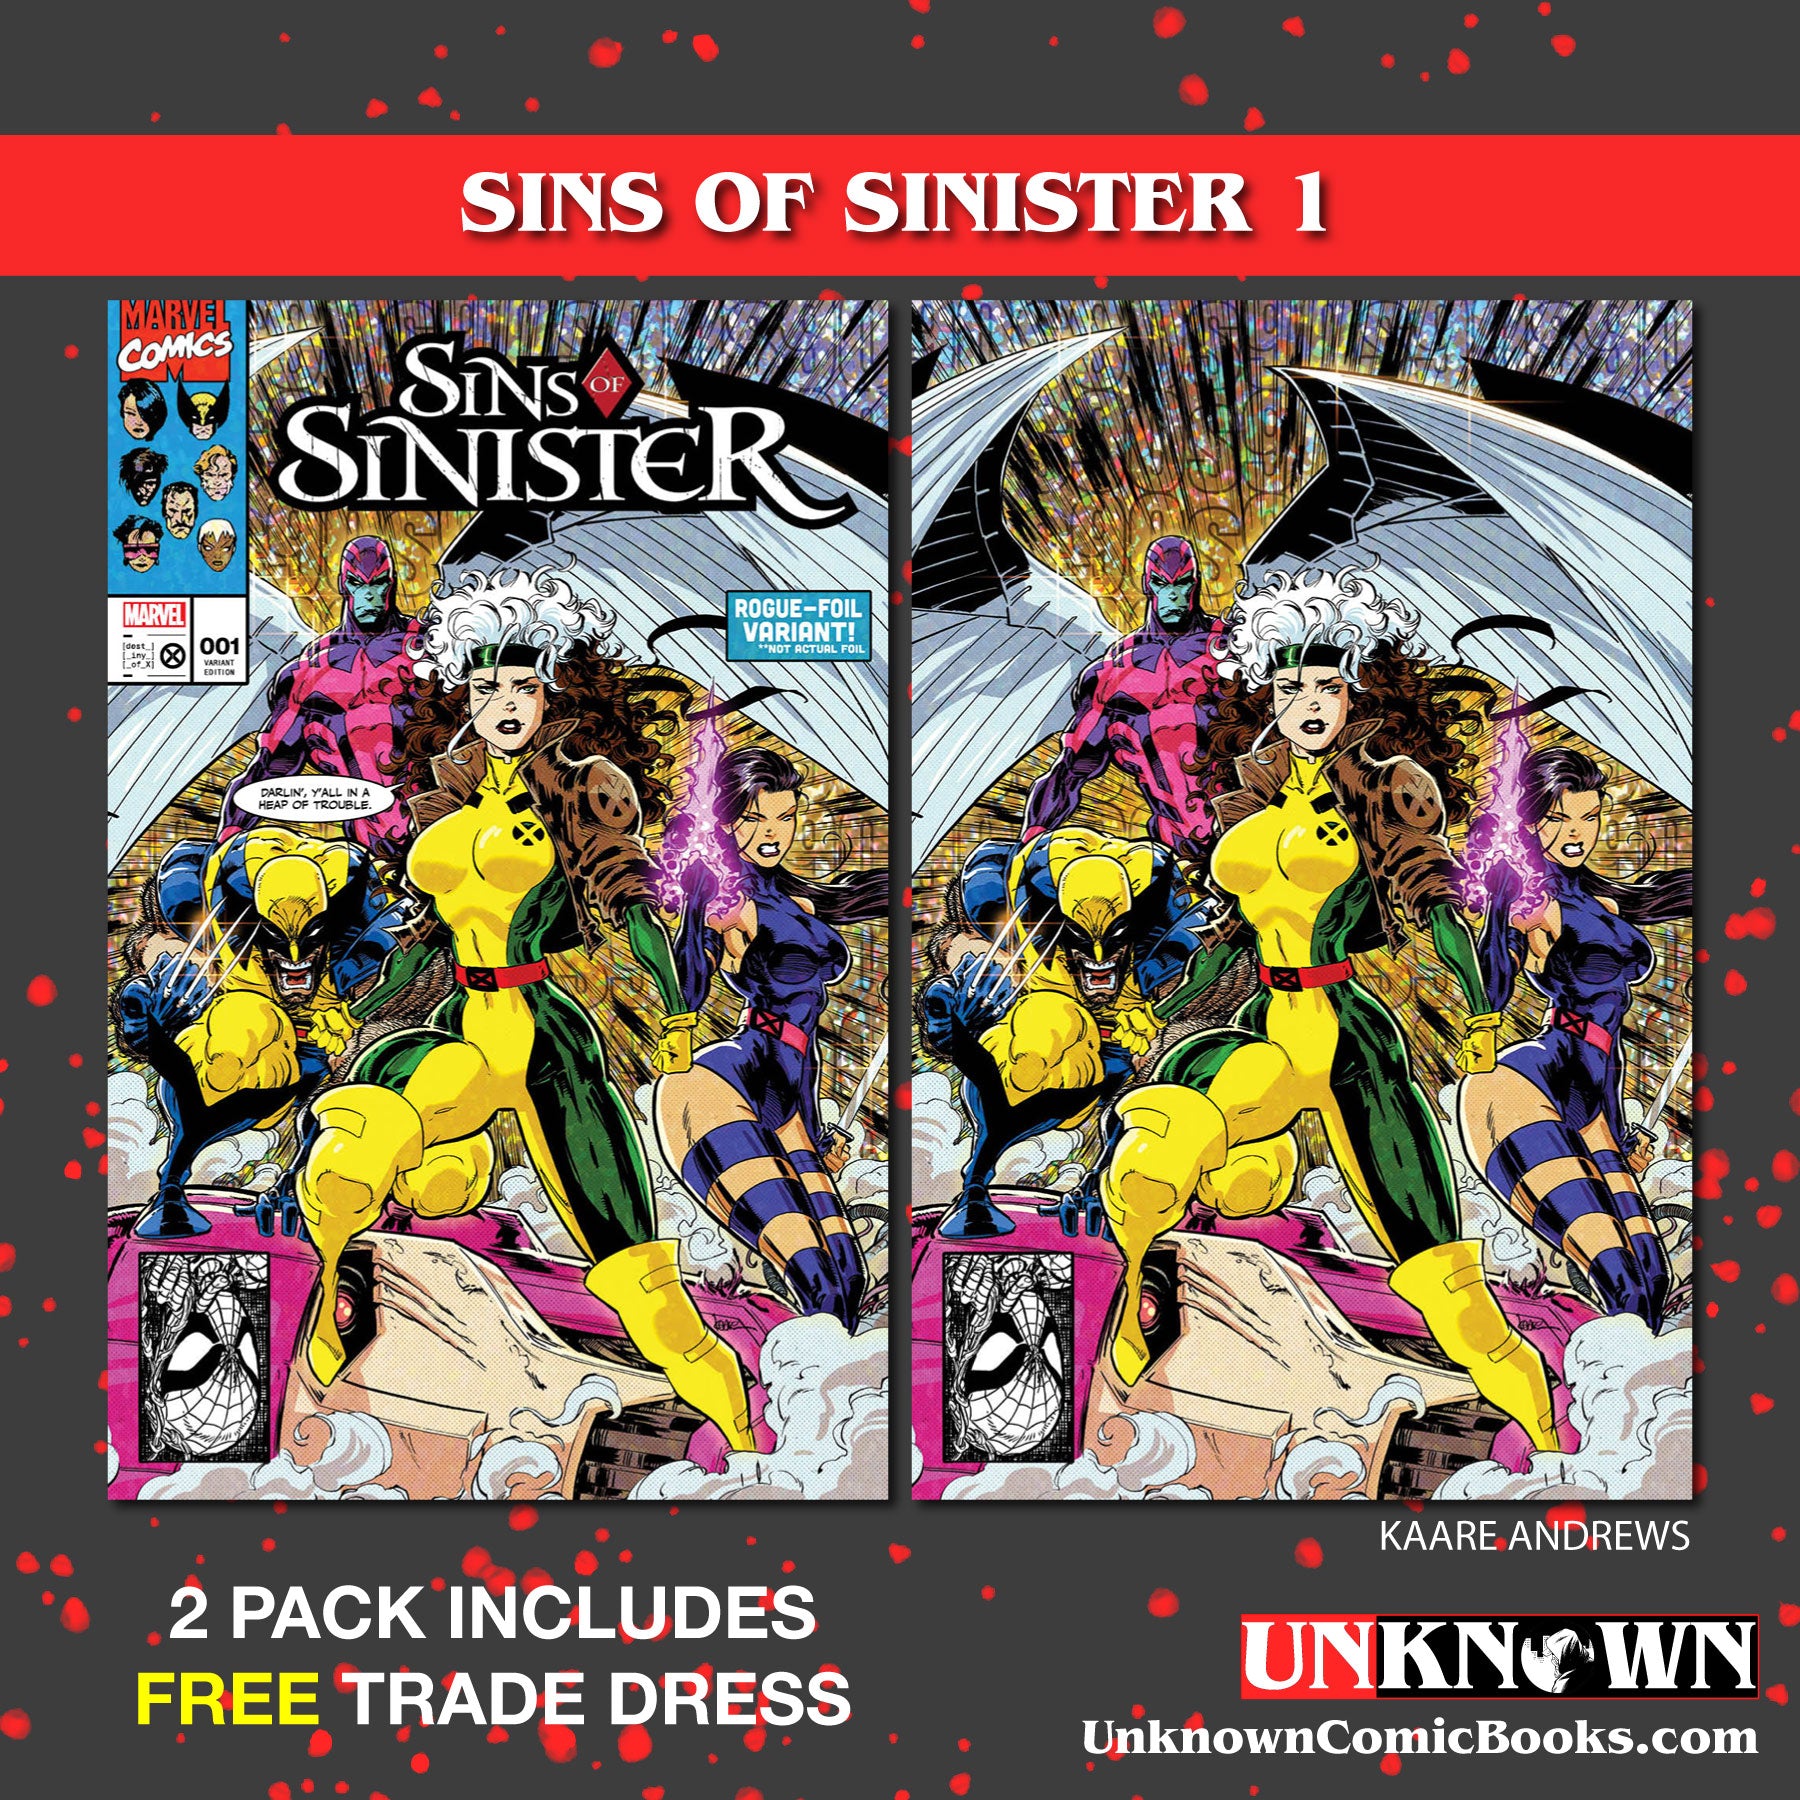 [2 PACK] **FREE TRADE DRESS** SINS OF SINISTER #1 UNKNOWN COMICS KAARE ANDREWS EXCLUSIVE VAR (01/25/2023)